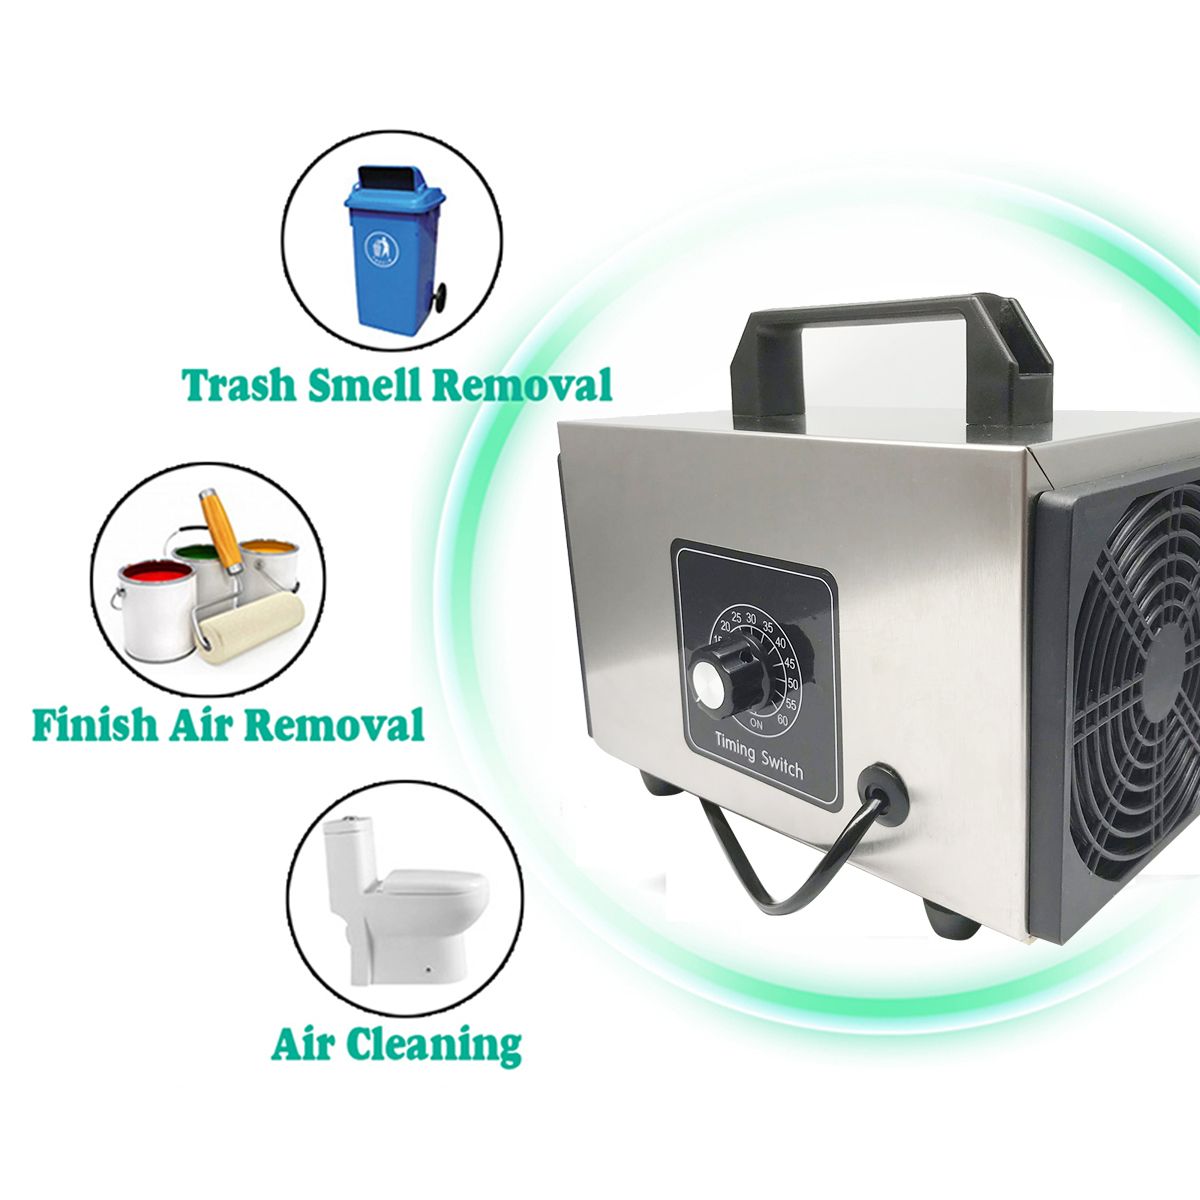 220V-Home-Ozone-Generator-Air-Purifier-Portable-Ozone-Machine-with-Timing-Switch-1698486